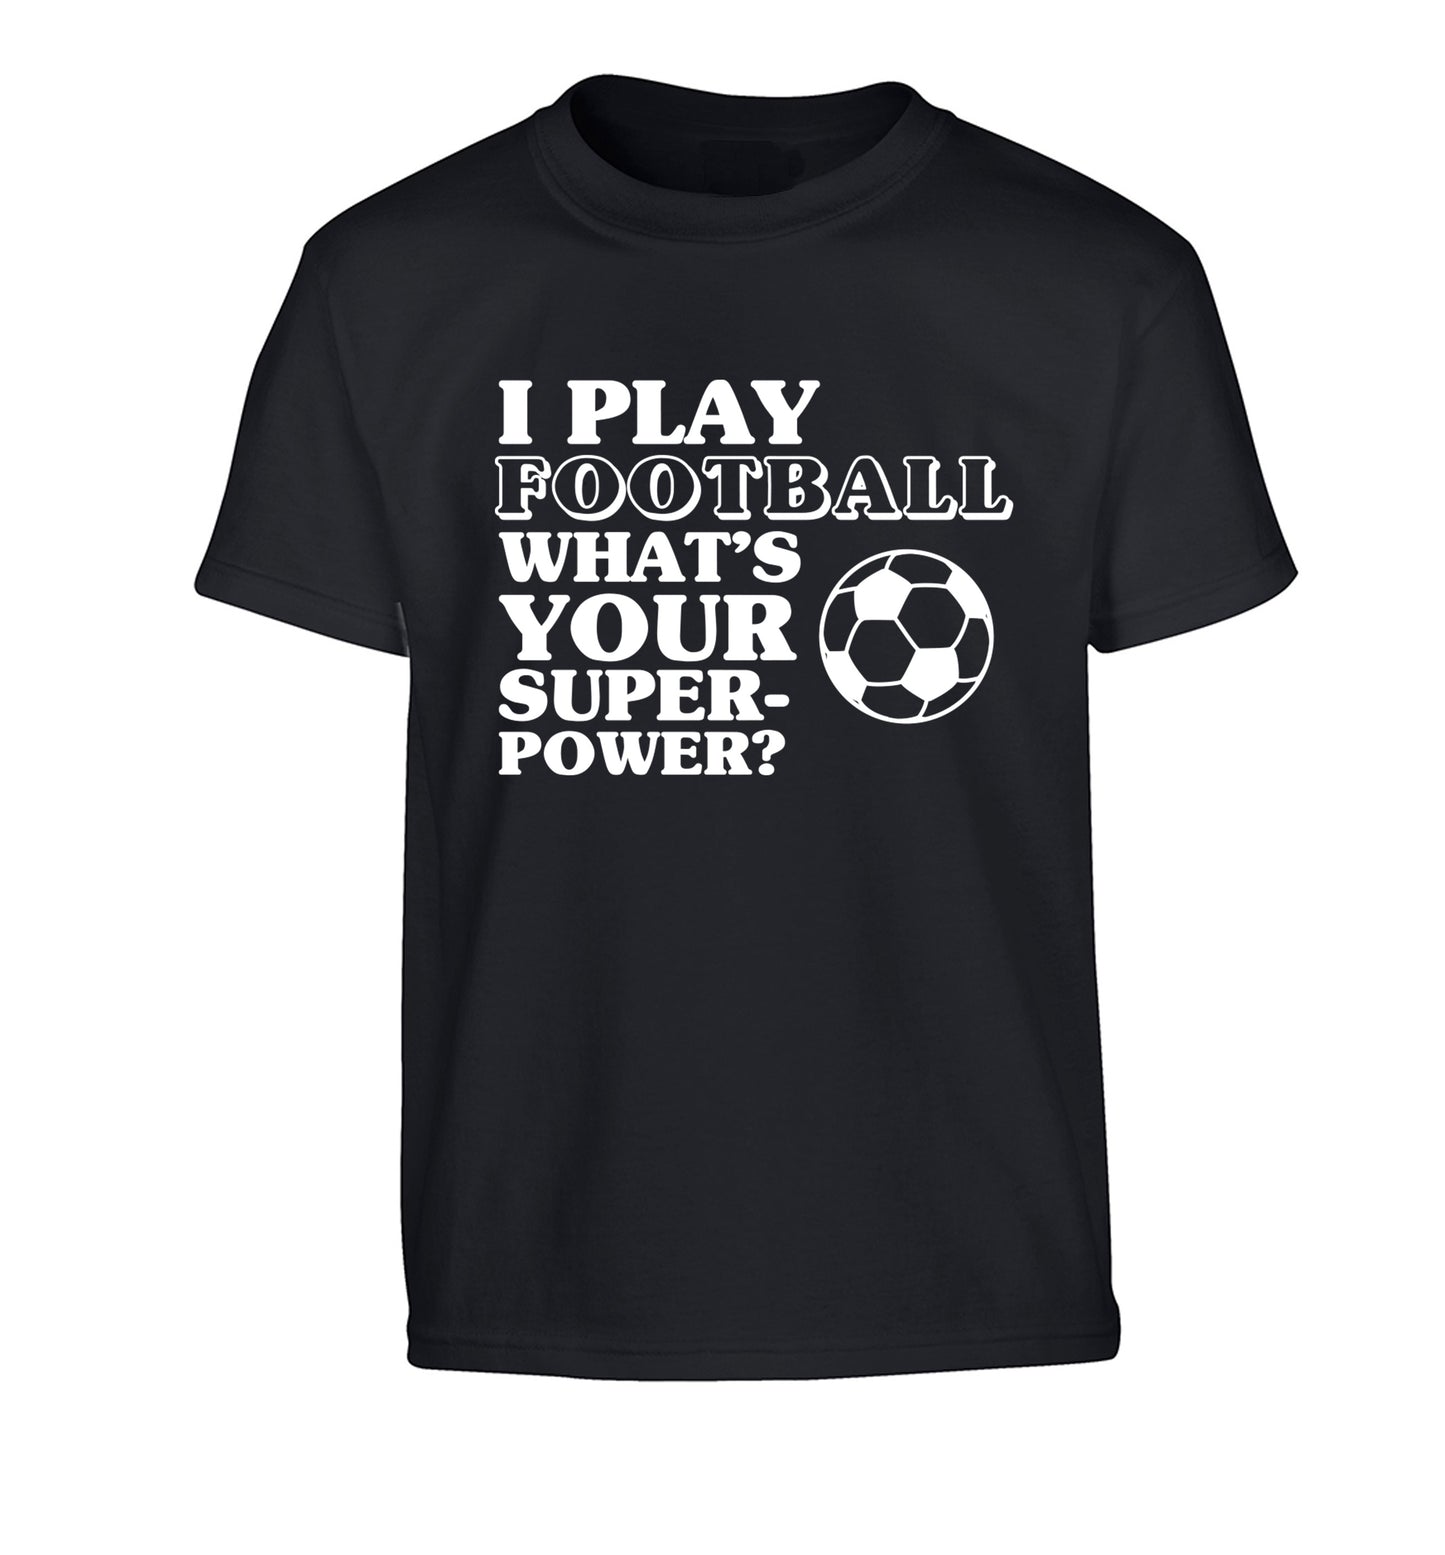 I play football what's your superpower? Children's black Tshirt 12-14 Years